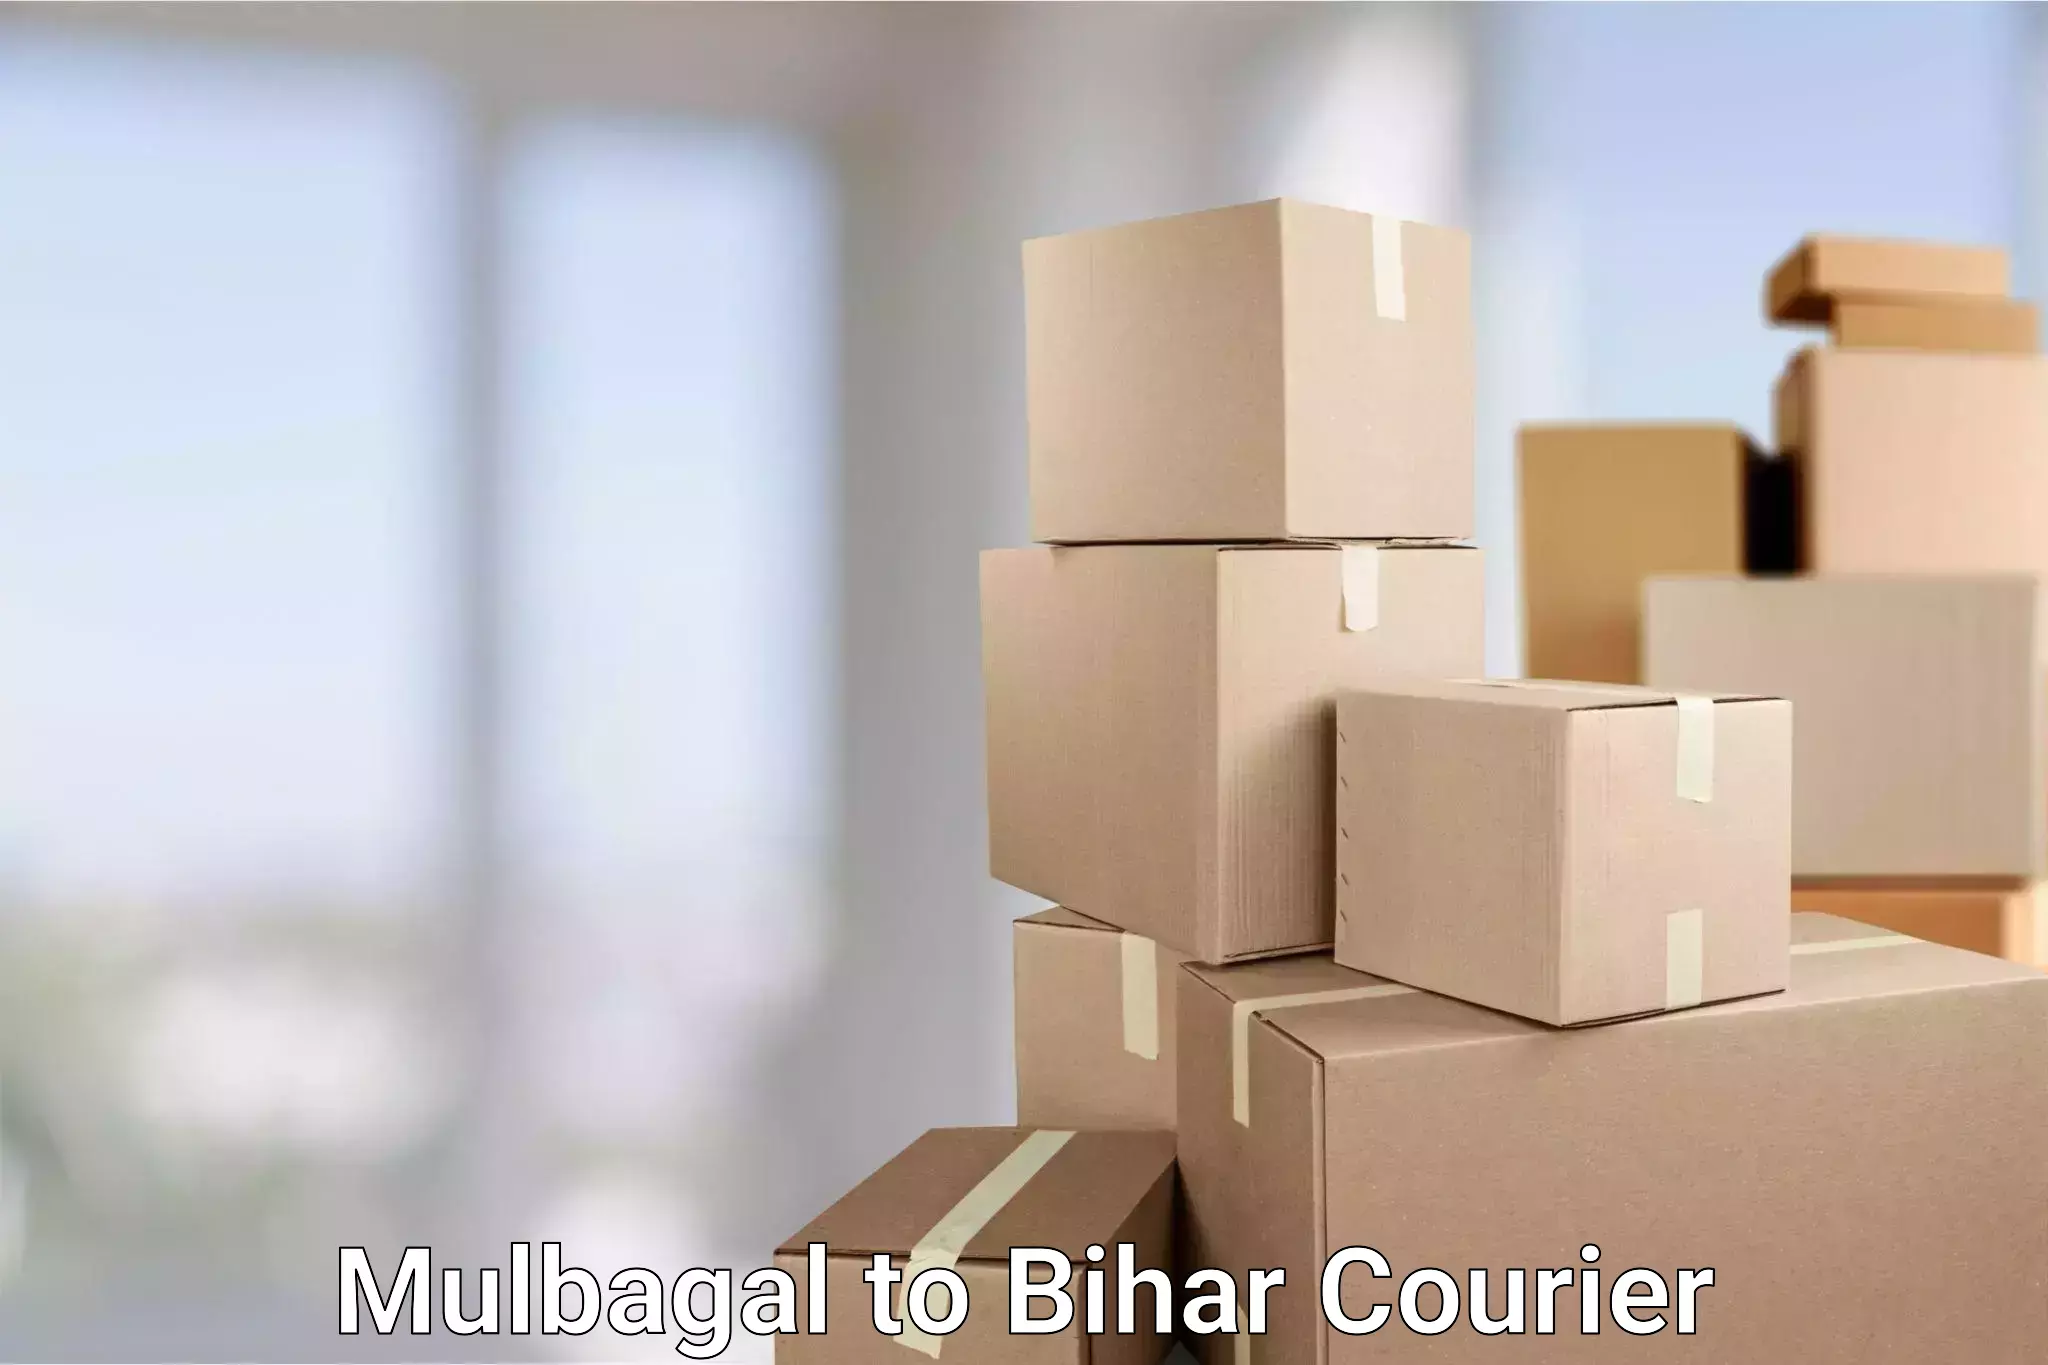 Global shipping solutions Mulbagal to Bihar